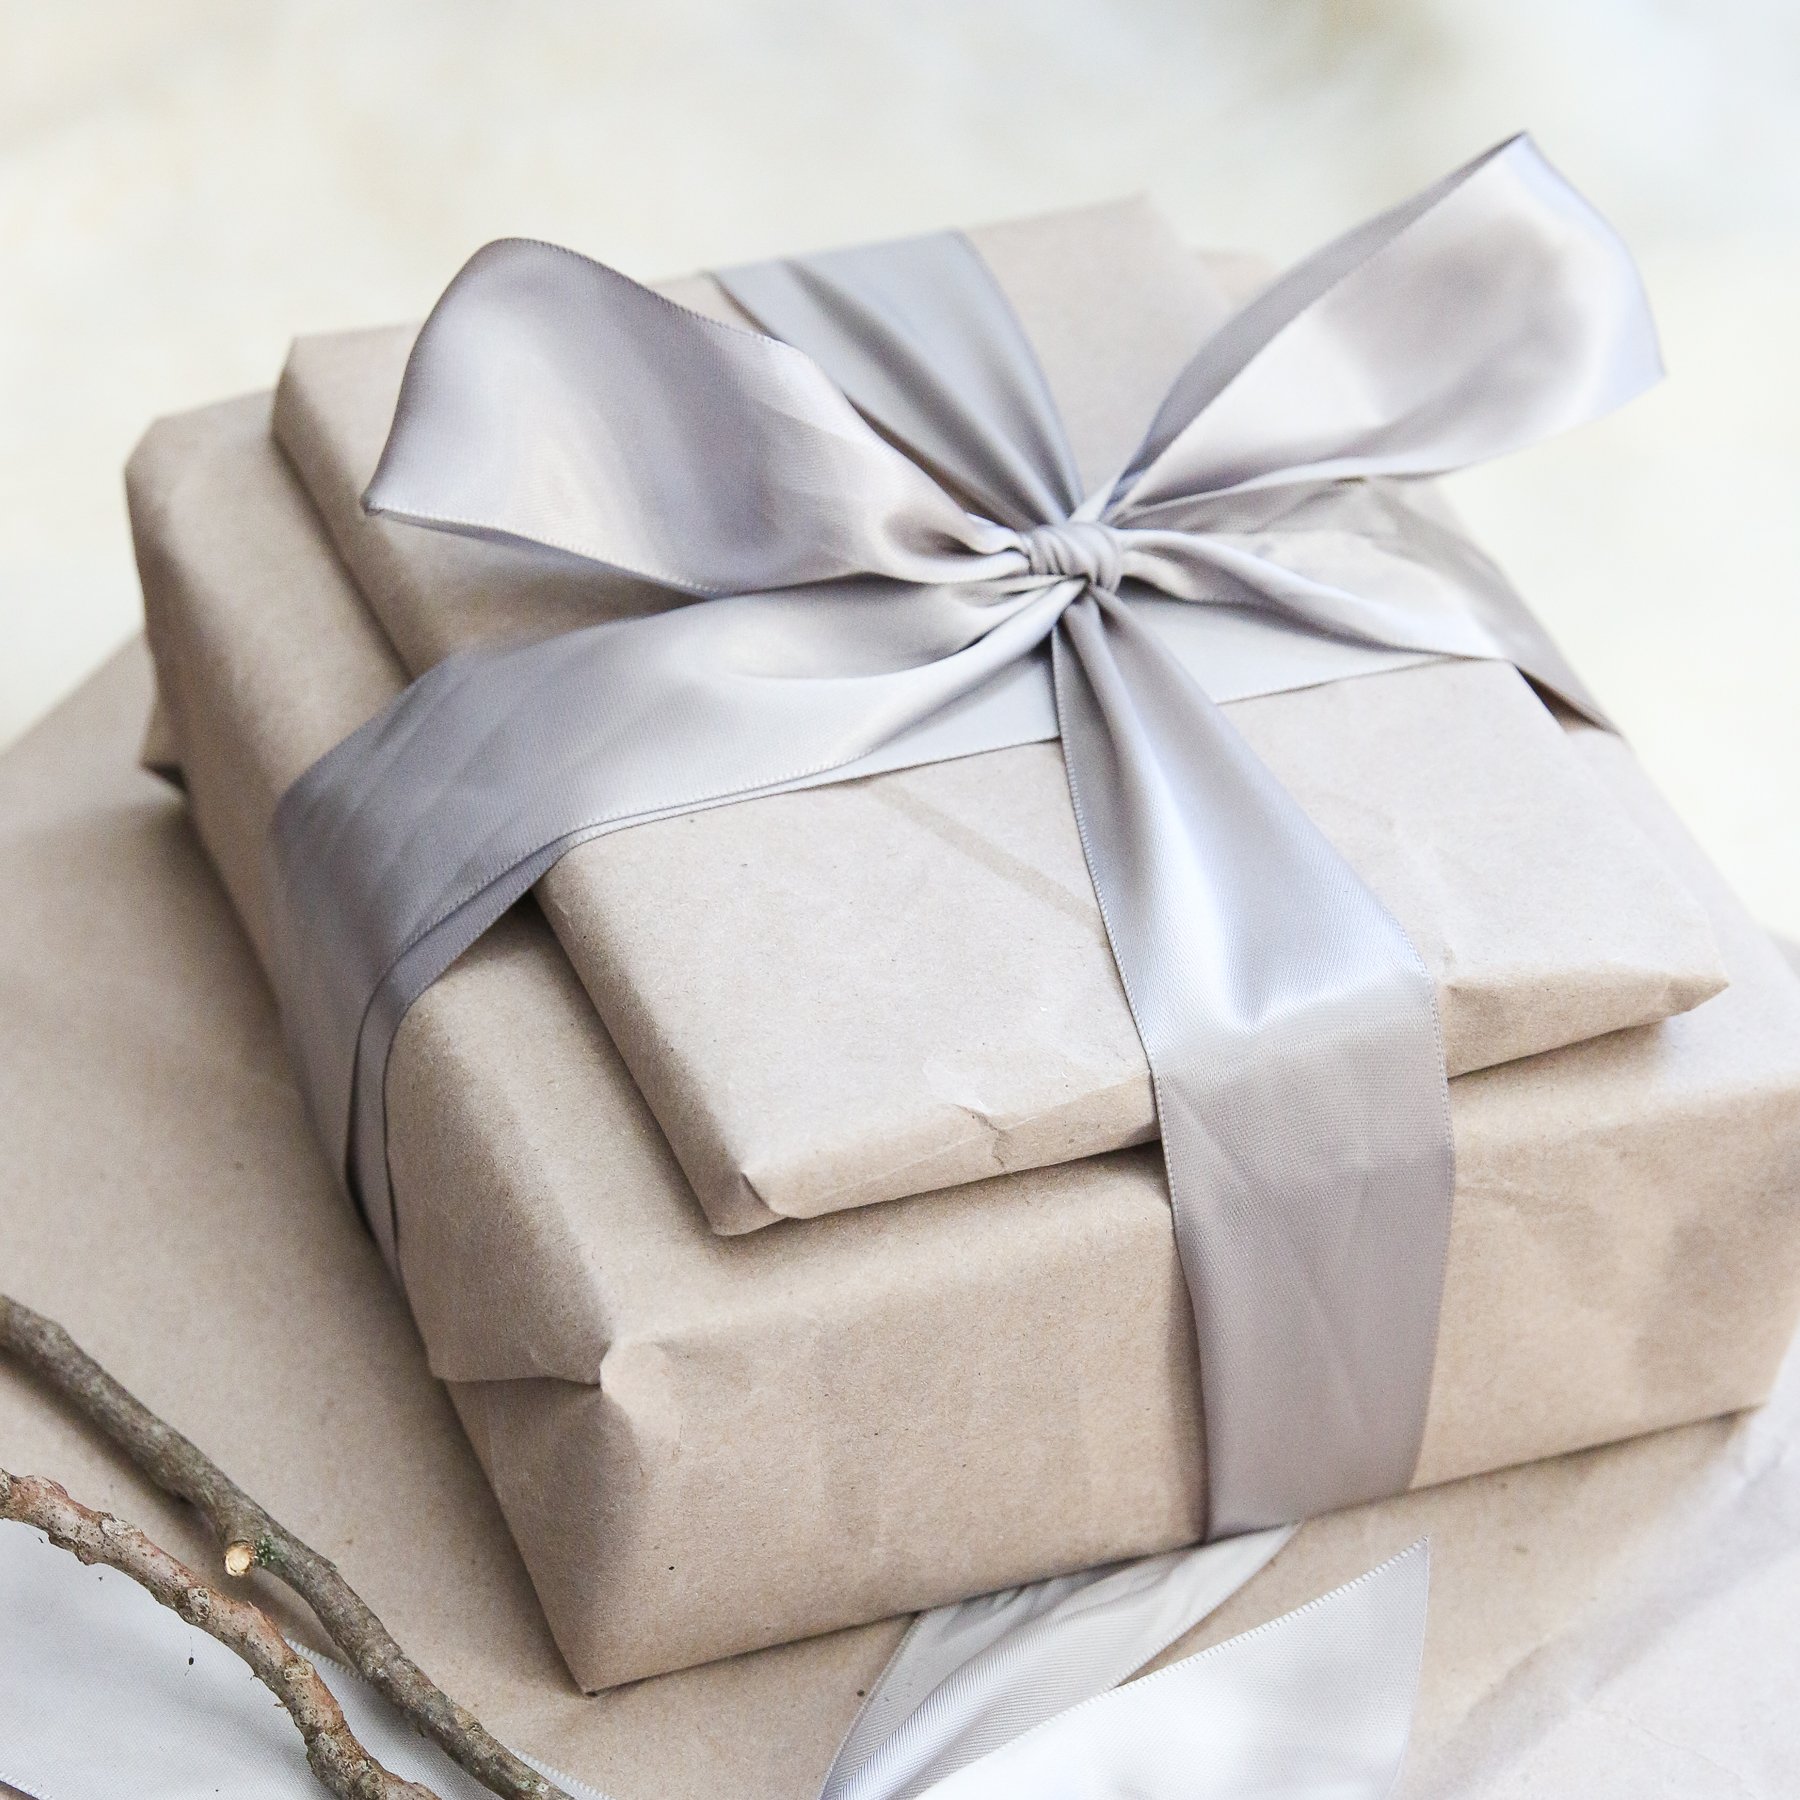 10 Free Zero-Waste Gift Wrap Ideas From Shipping Materials